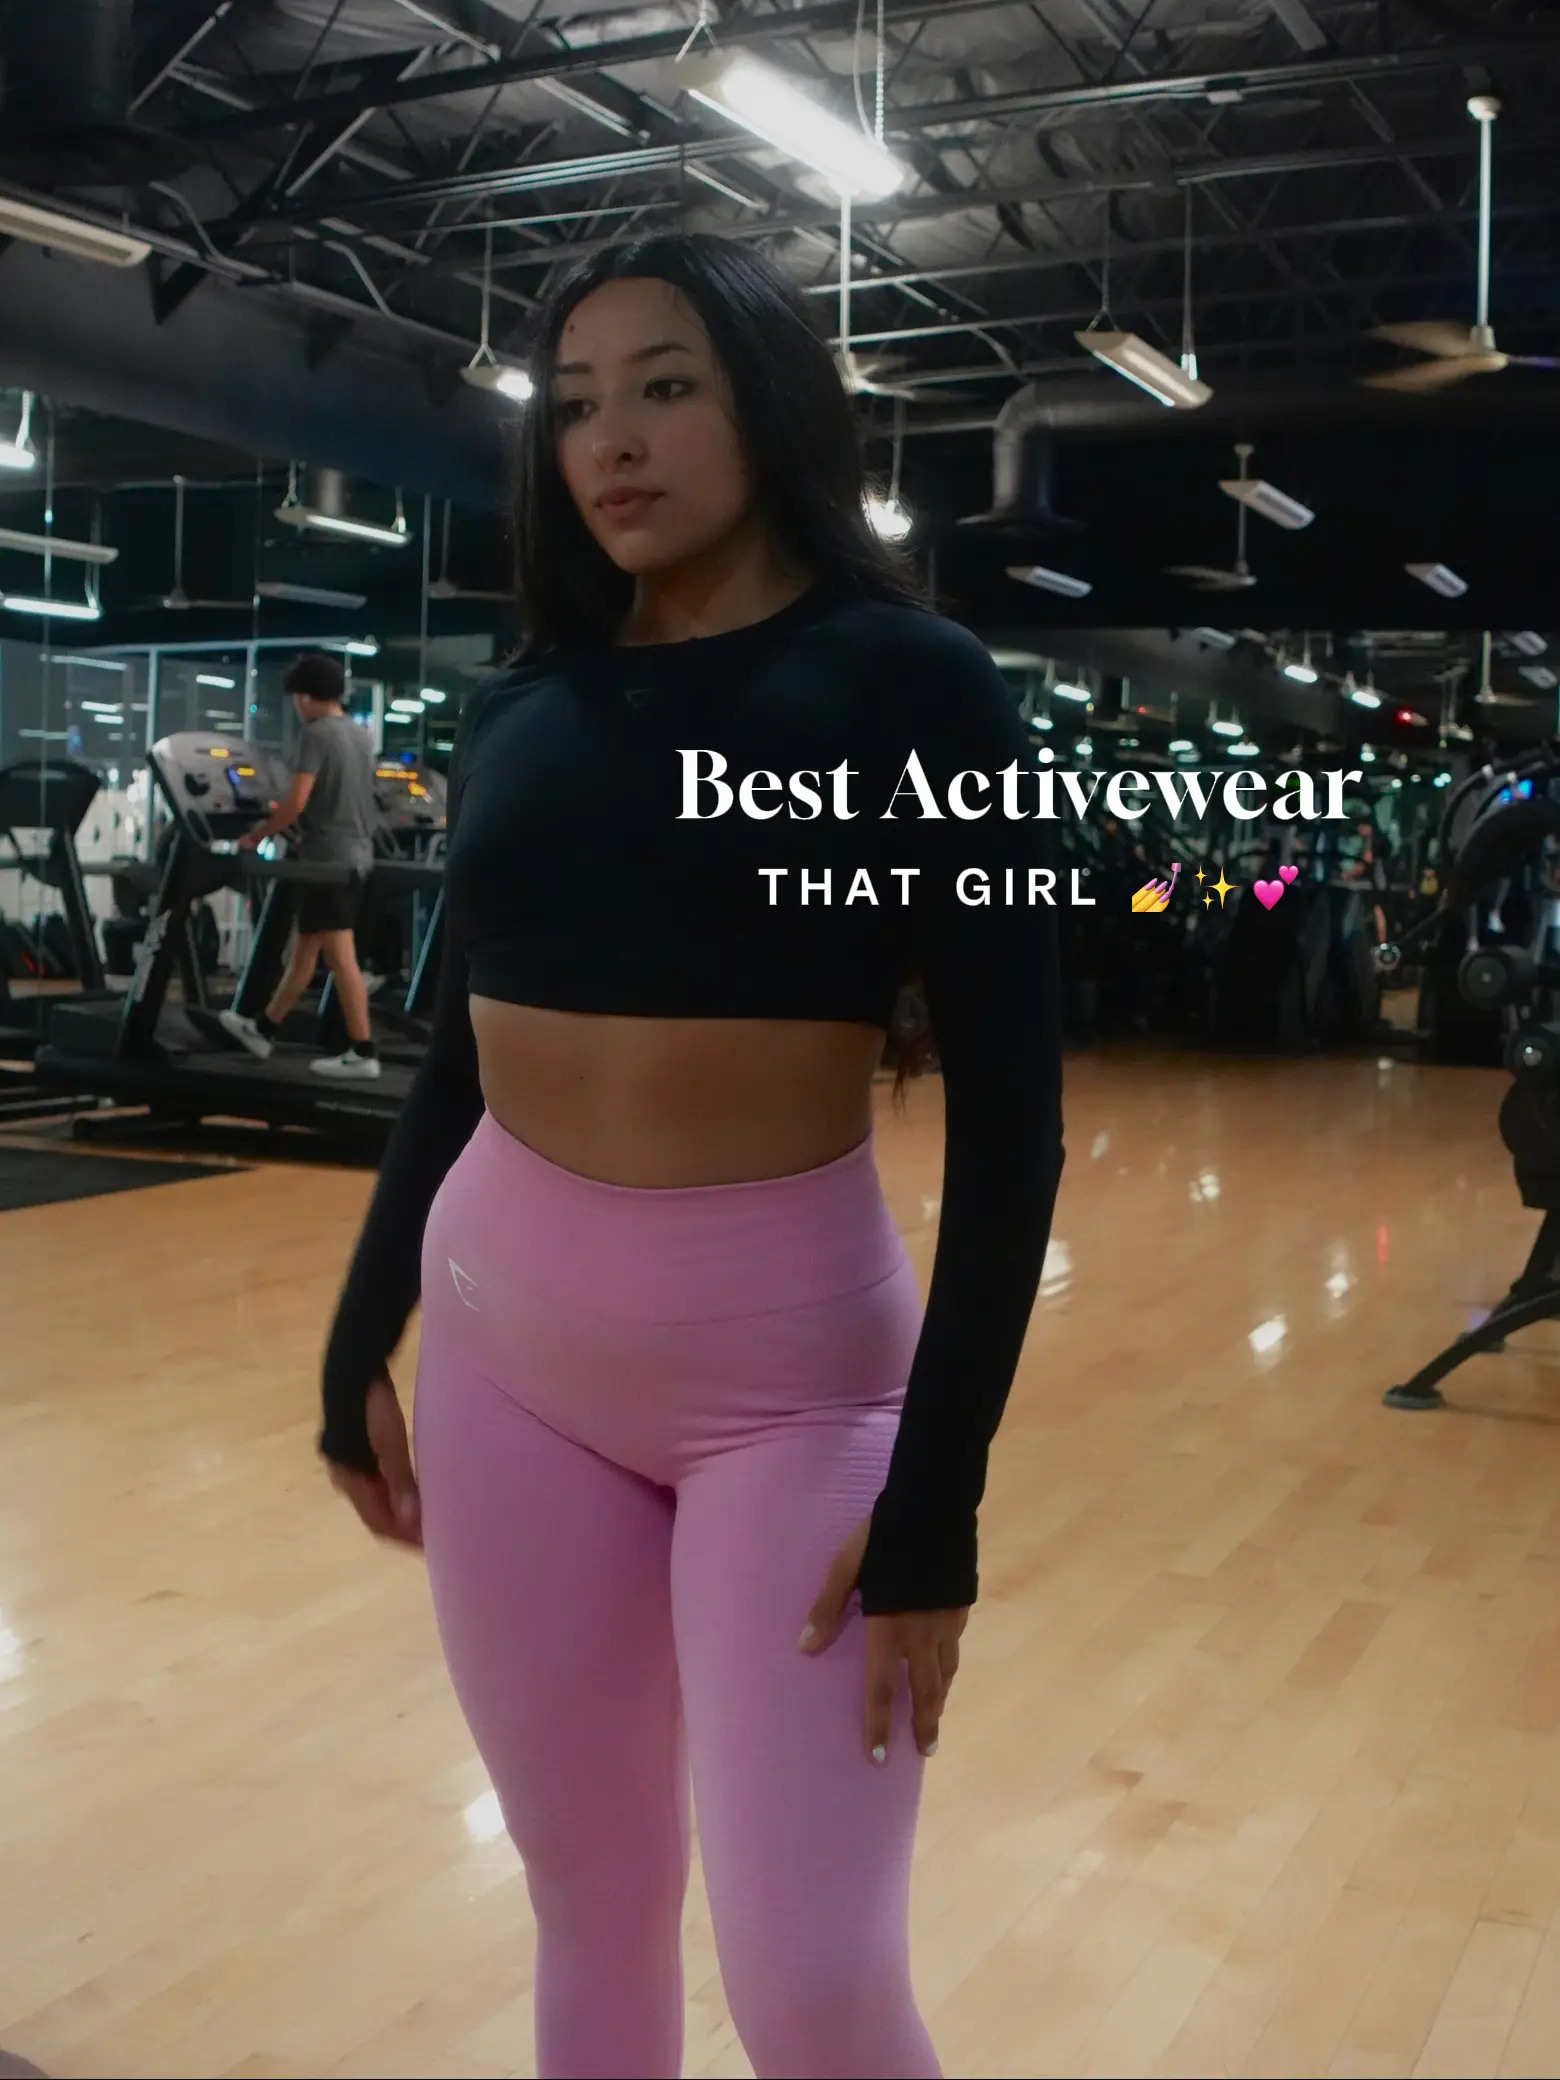 STAX. Women's Activewear On Sale Up To 90% Off Retail